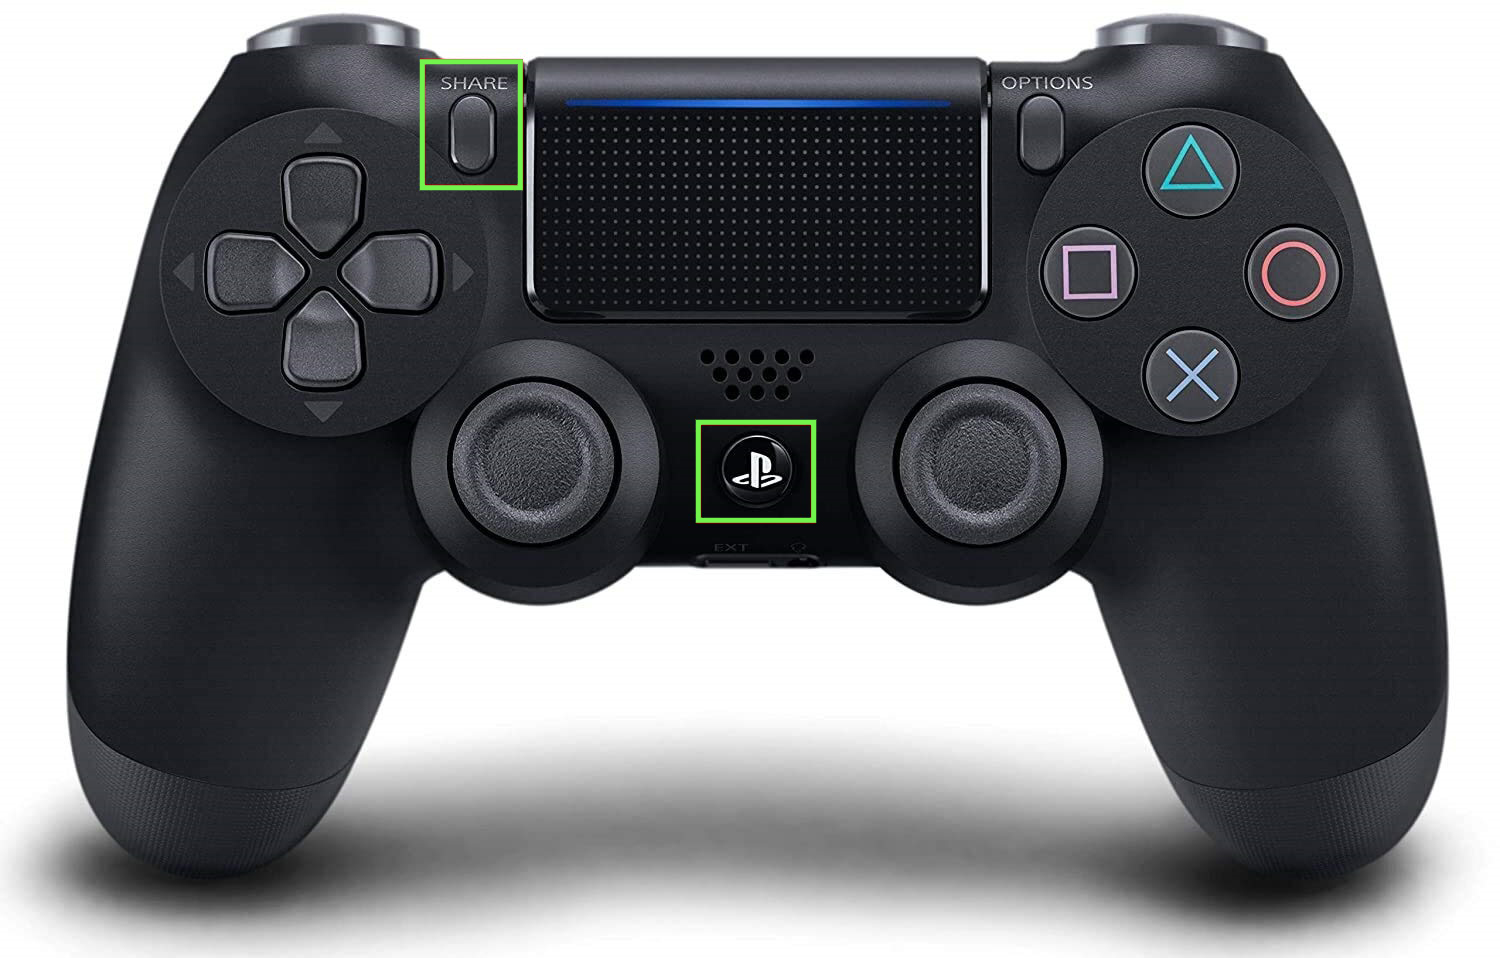 How to use a PS4 controller on Steam — pair controller